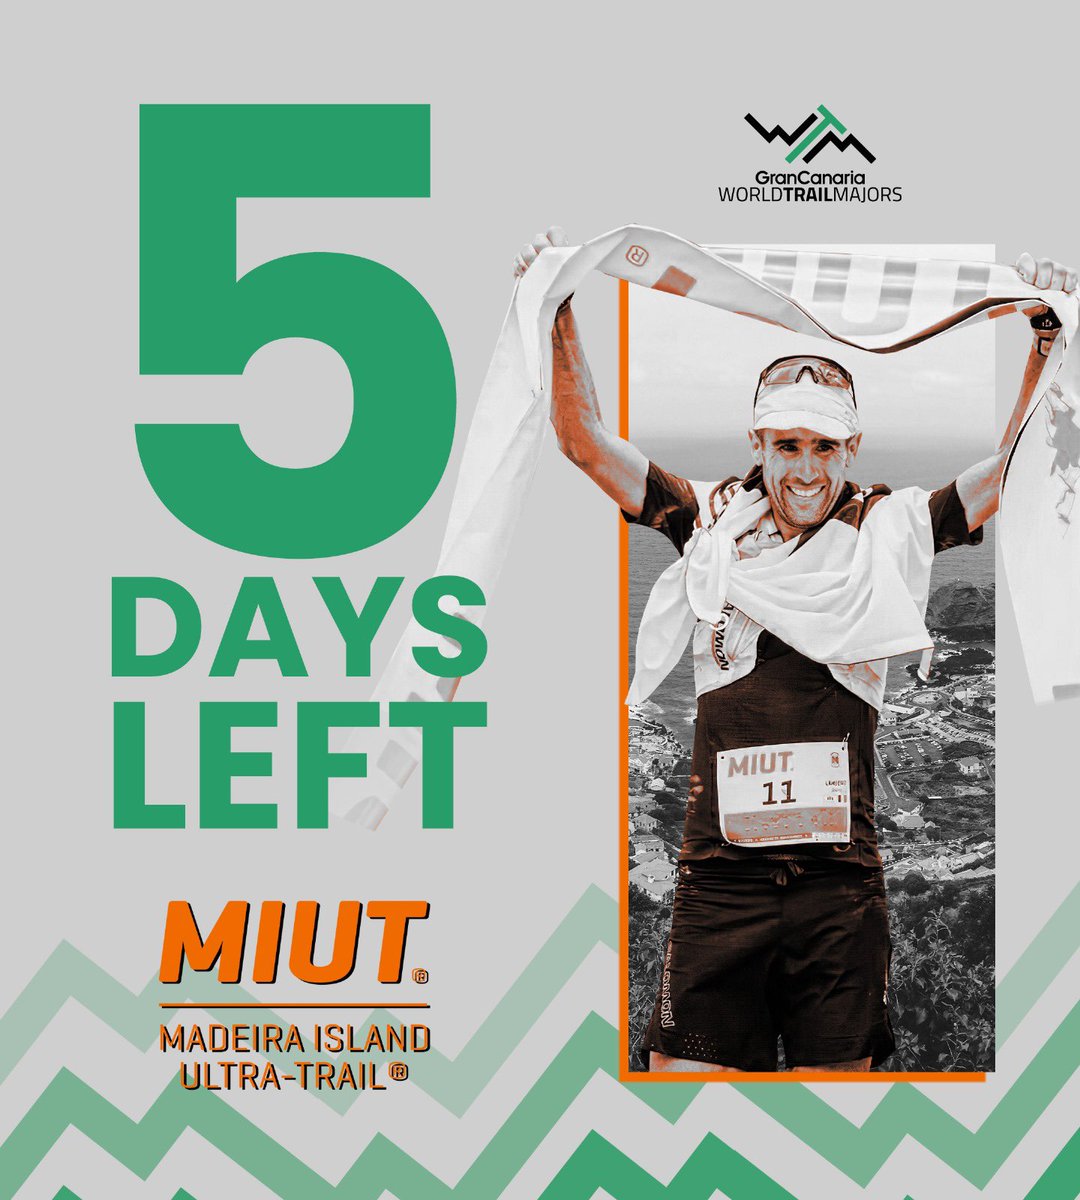 ⌛ It's the final countdown… In 🖐 five days you are going to be running in Madeira Island! 

Are you ready to discover @MIUTrail ? 🤗

#grancanariaworldtrailmajors #RacesOfALifetime